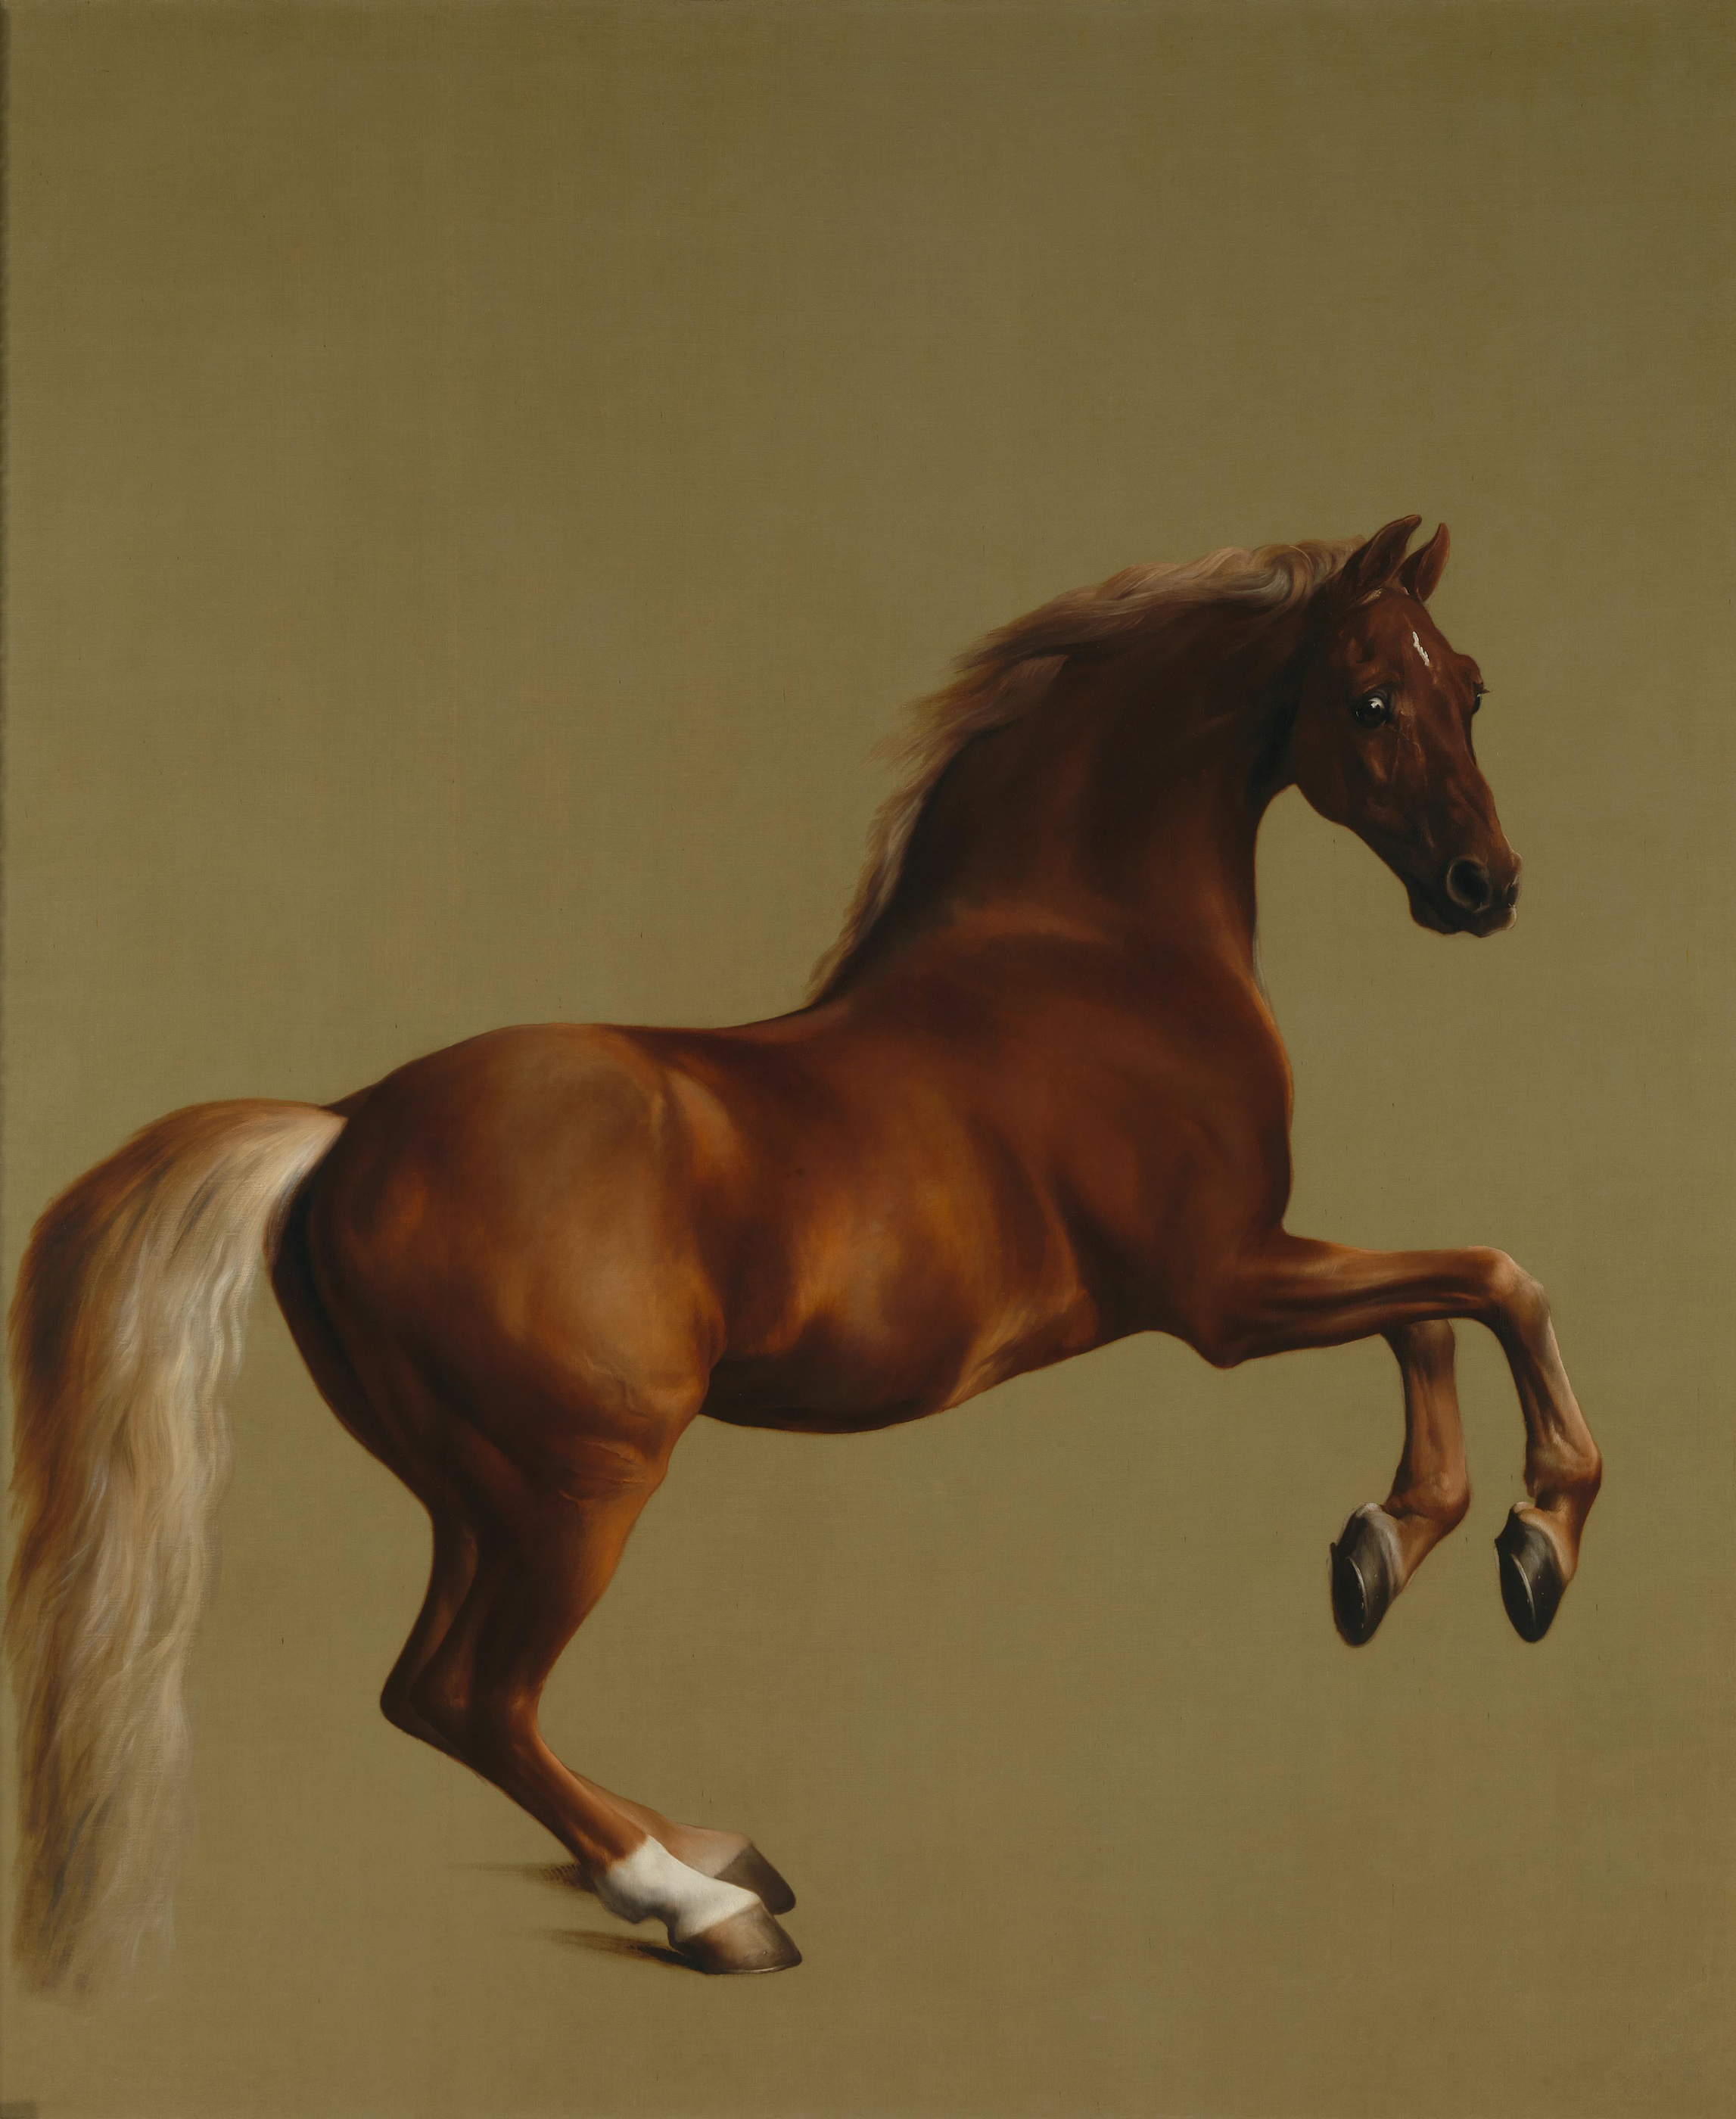 Whistlejacket by George Stubbs - 1762 - 292 x 246 cm National Gallery